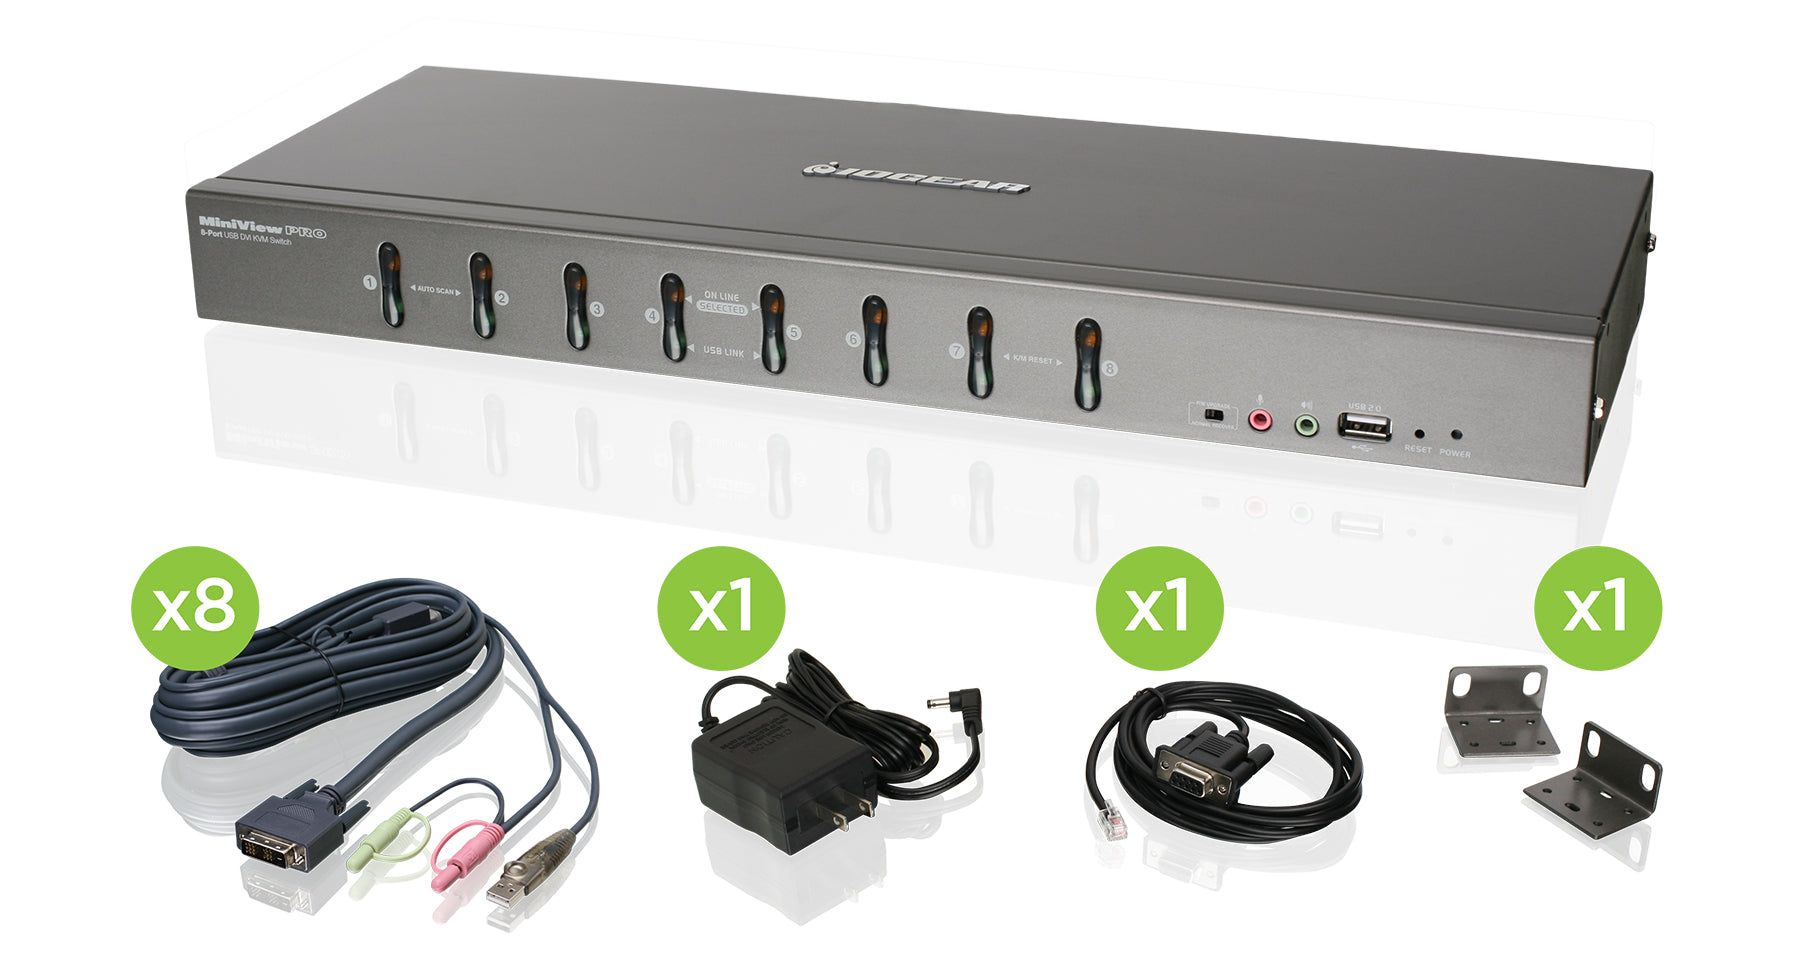 8-Port DVI KVMP Switch with VGA Support and USB KVM Cables